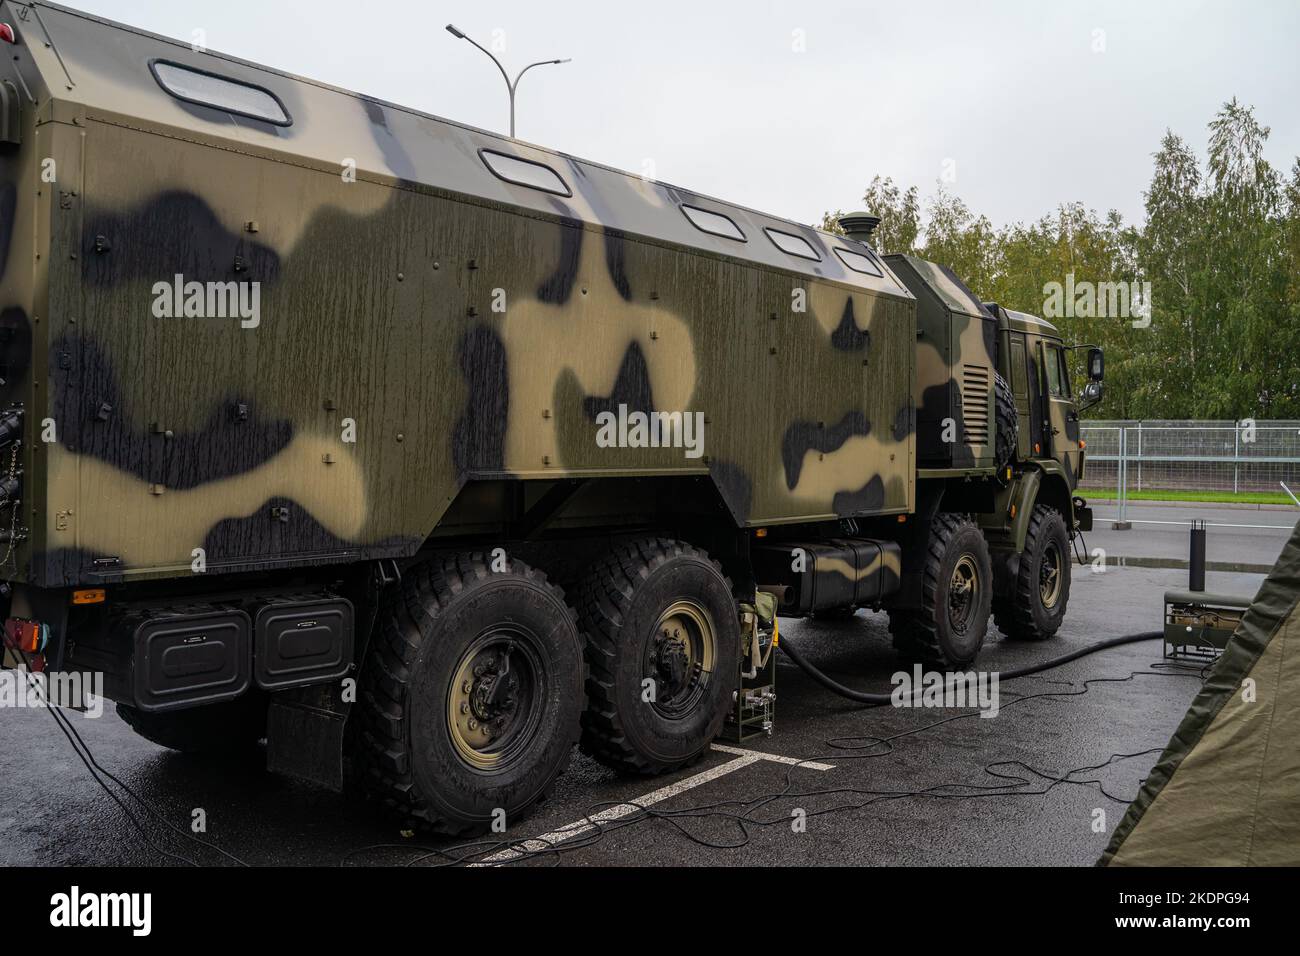 A mobile bathhouse for soldiers. Exterior view. Military equipment for participation in armed conflict.  Stock Photo